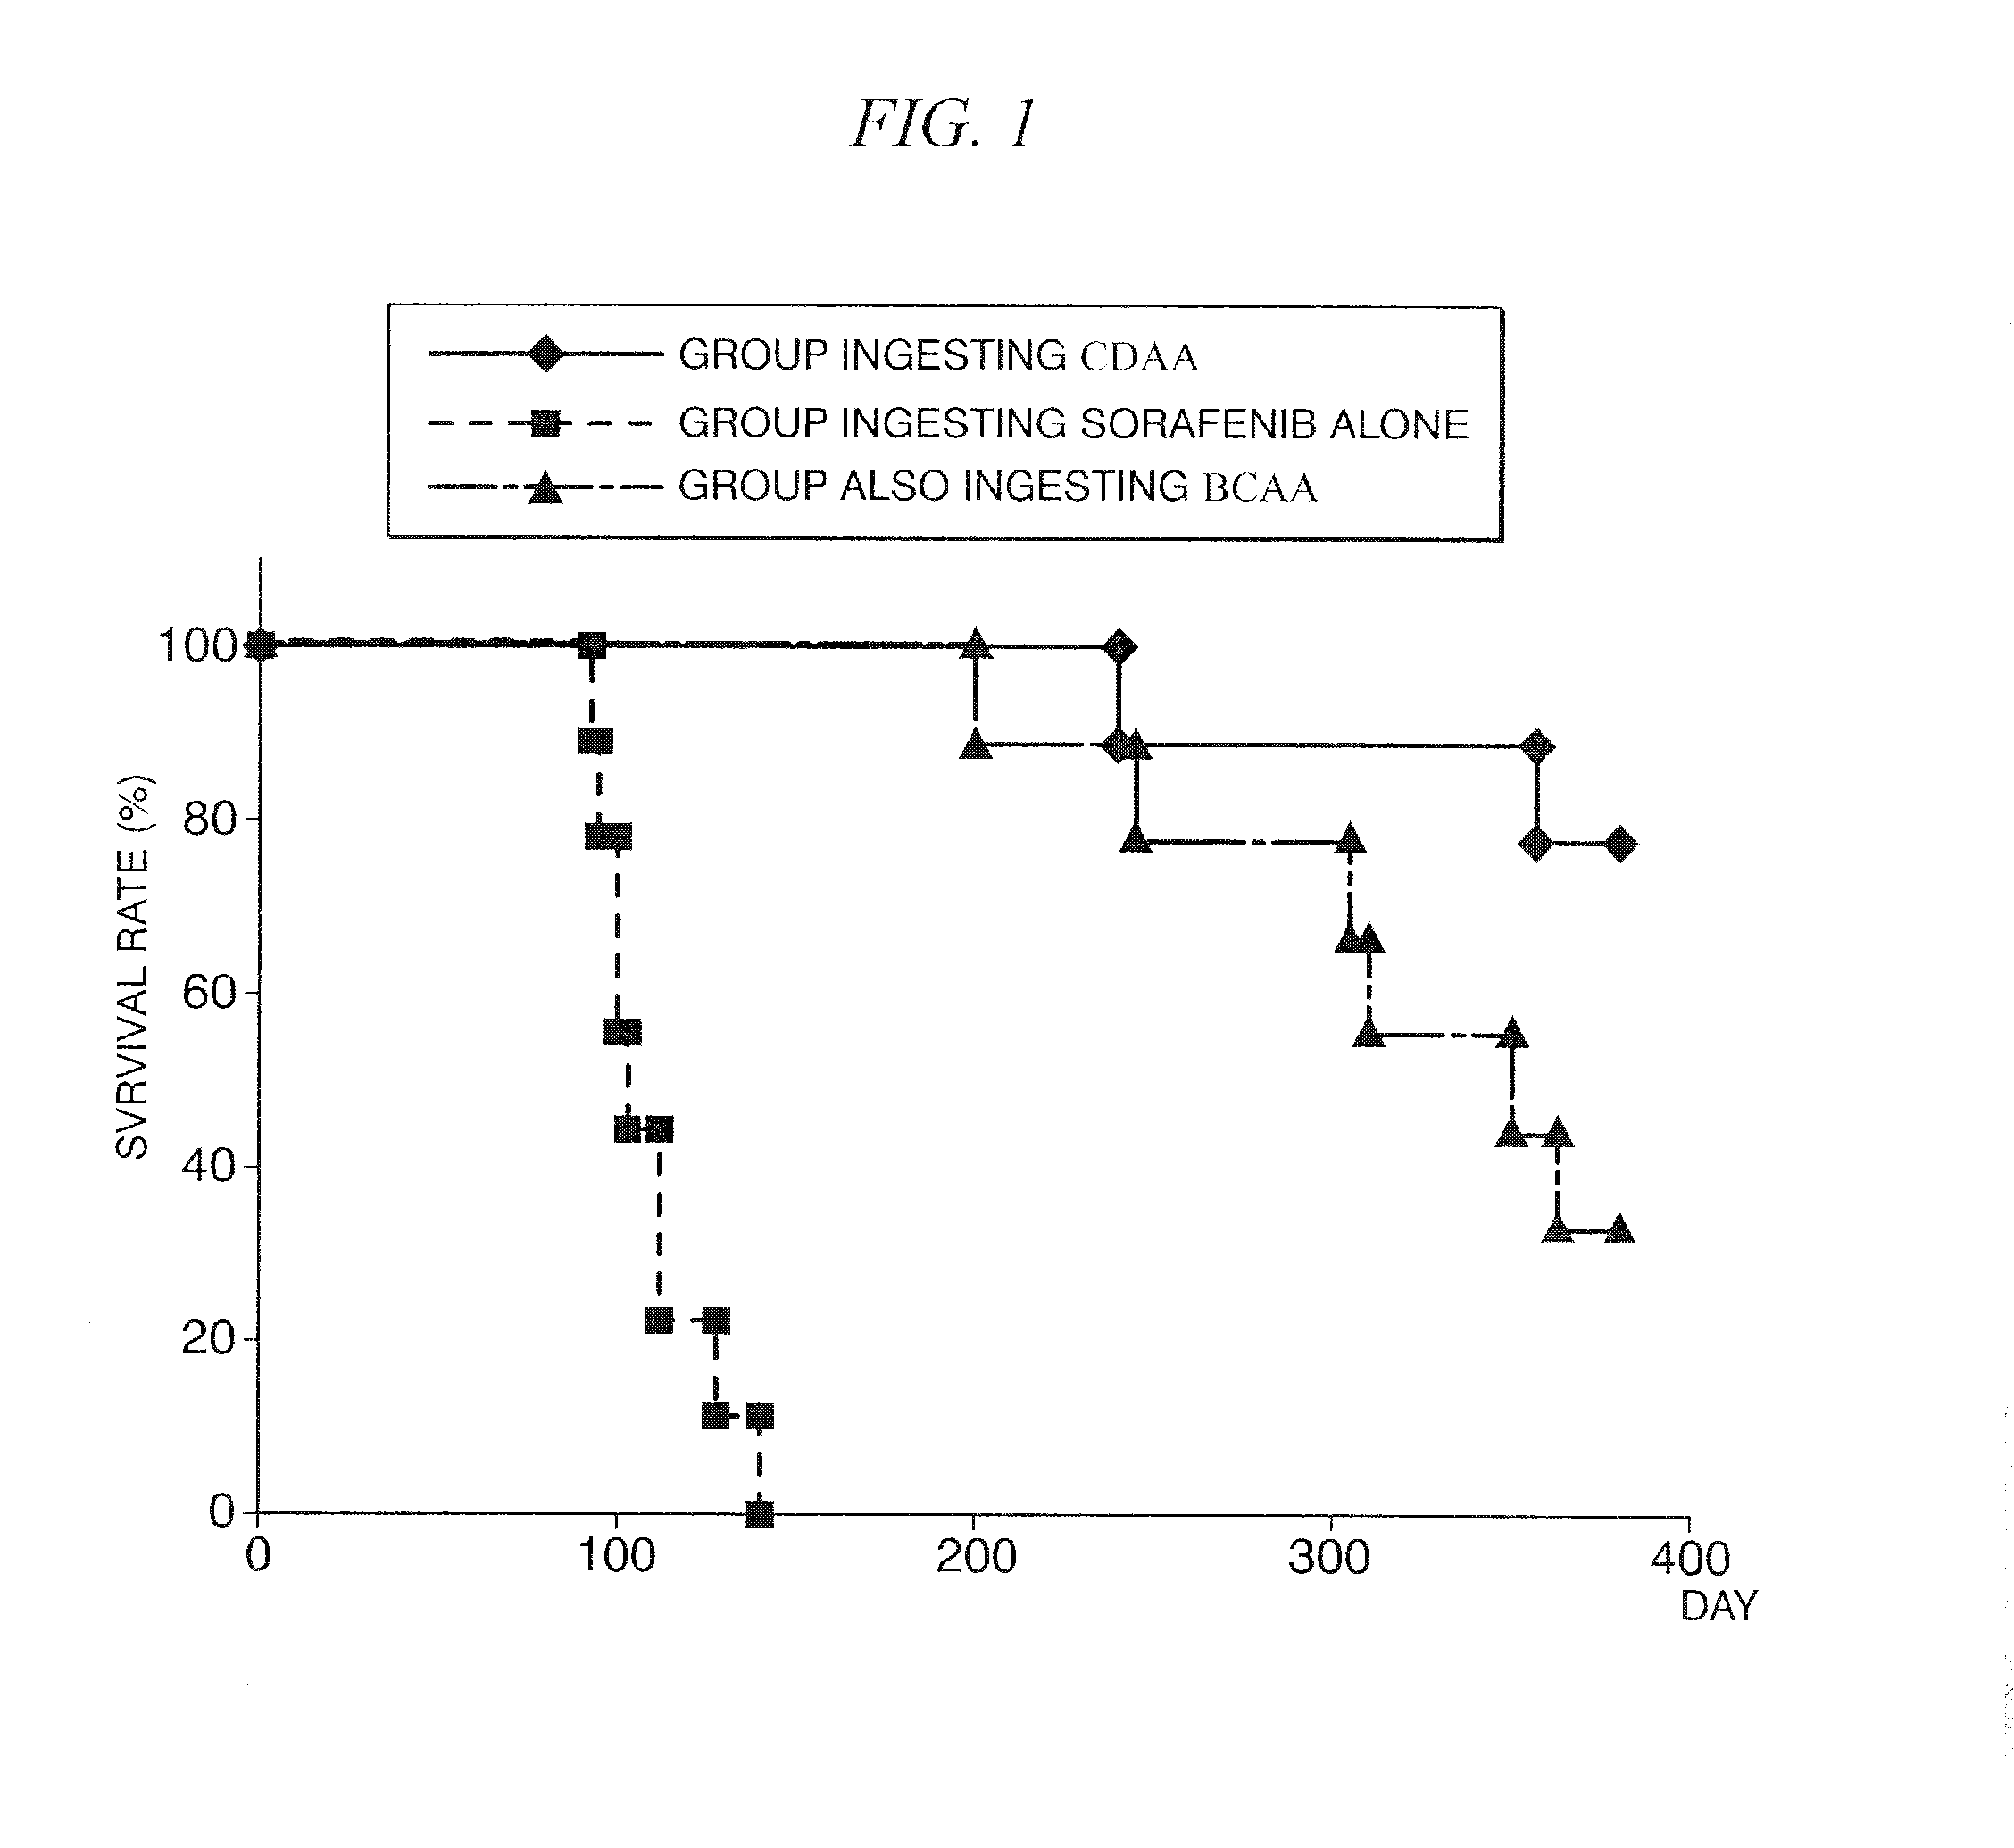 Agent for reducing side effects of kinase inhibitor